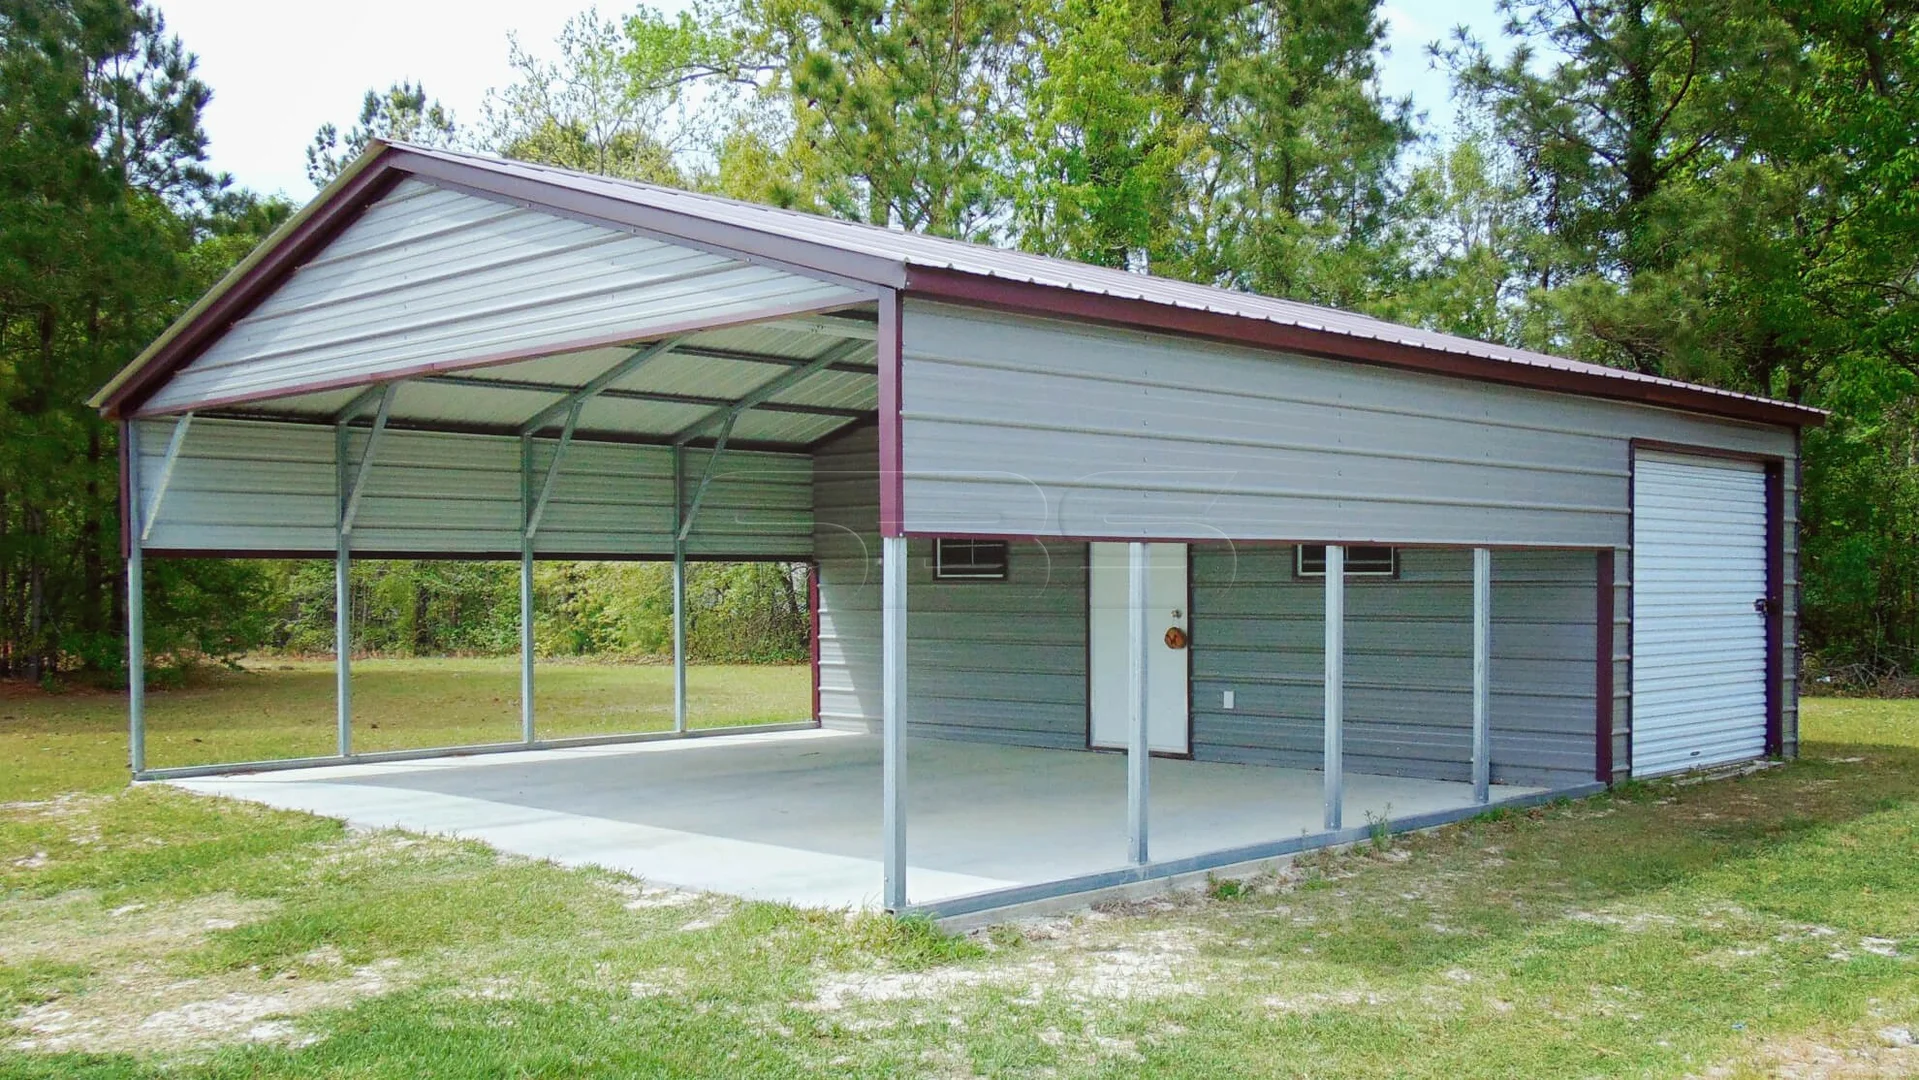 Double carport with storage building and burgundy roof